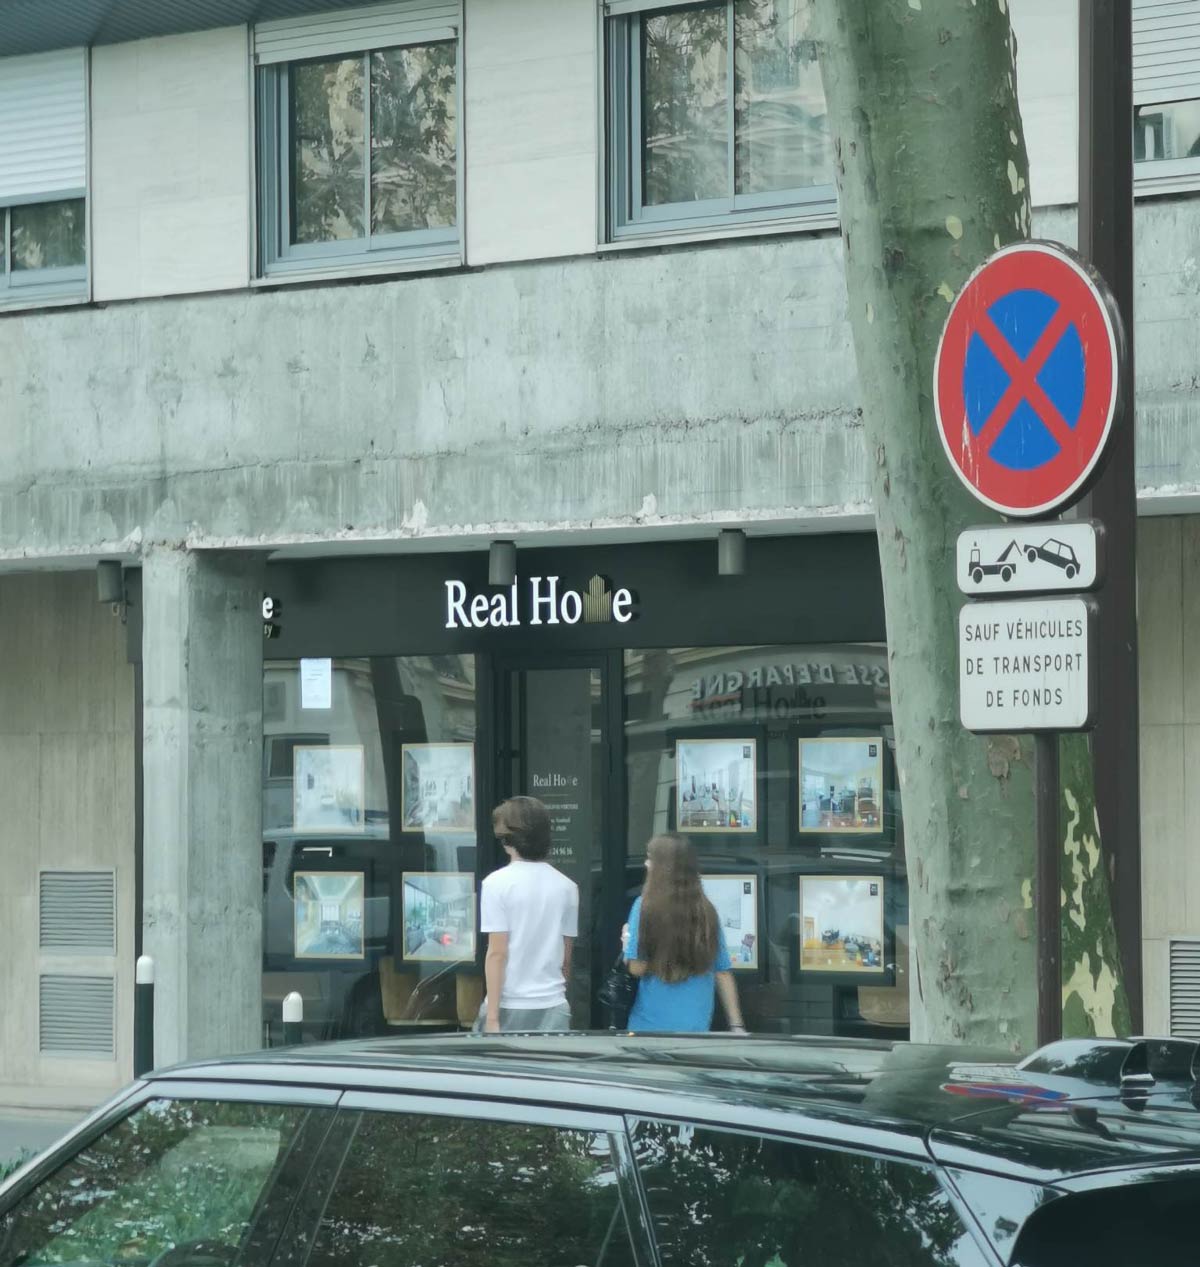 My friend saw this real estate agency in Paris